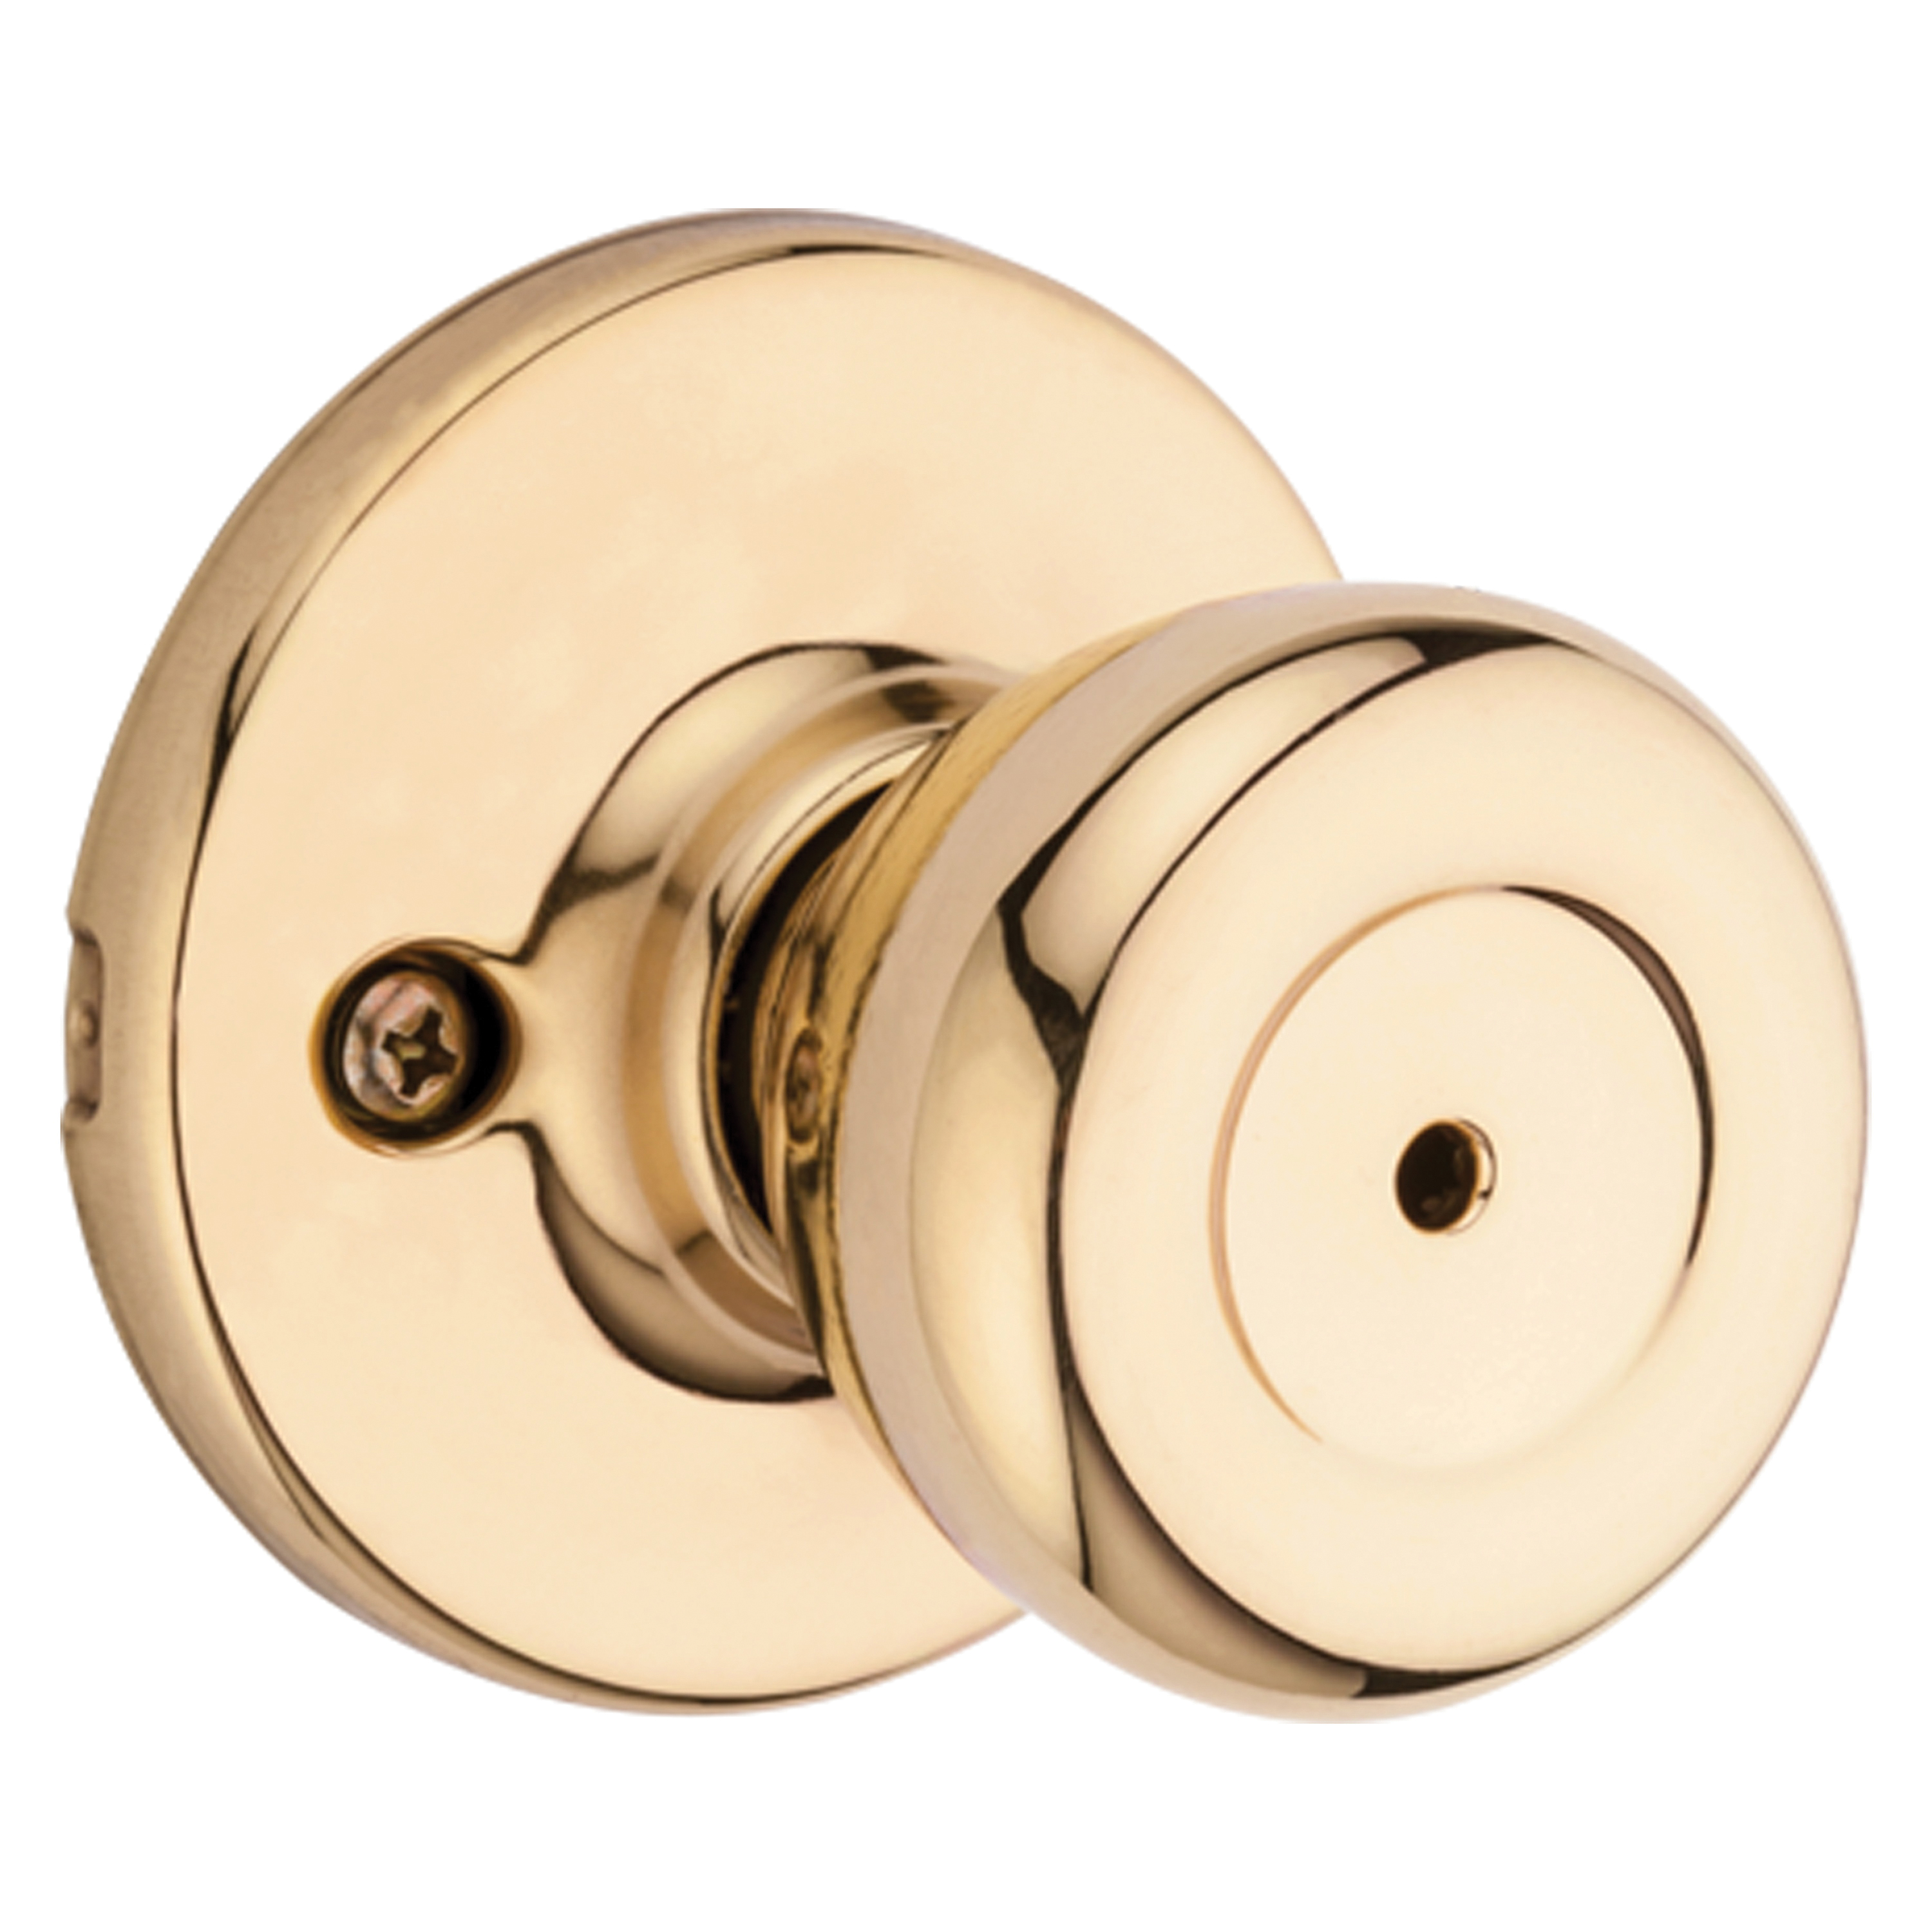 300T 3RCLRCSBX Privacy Lockset, Polished Brass, For: Bedroom and Bathroom Doors